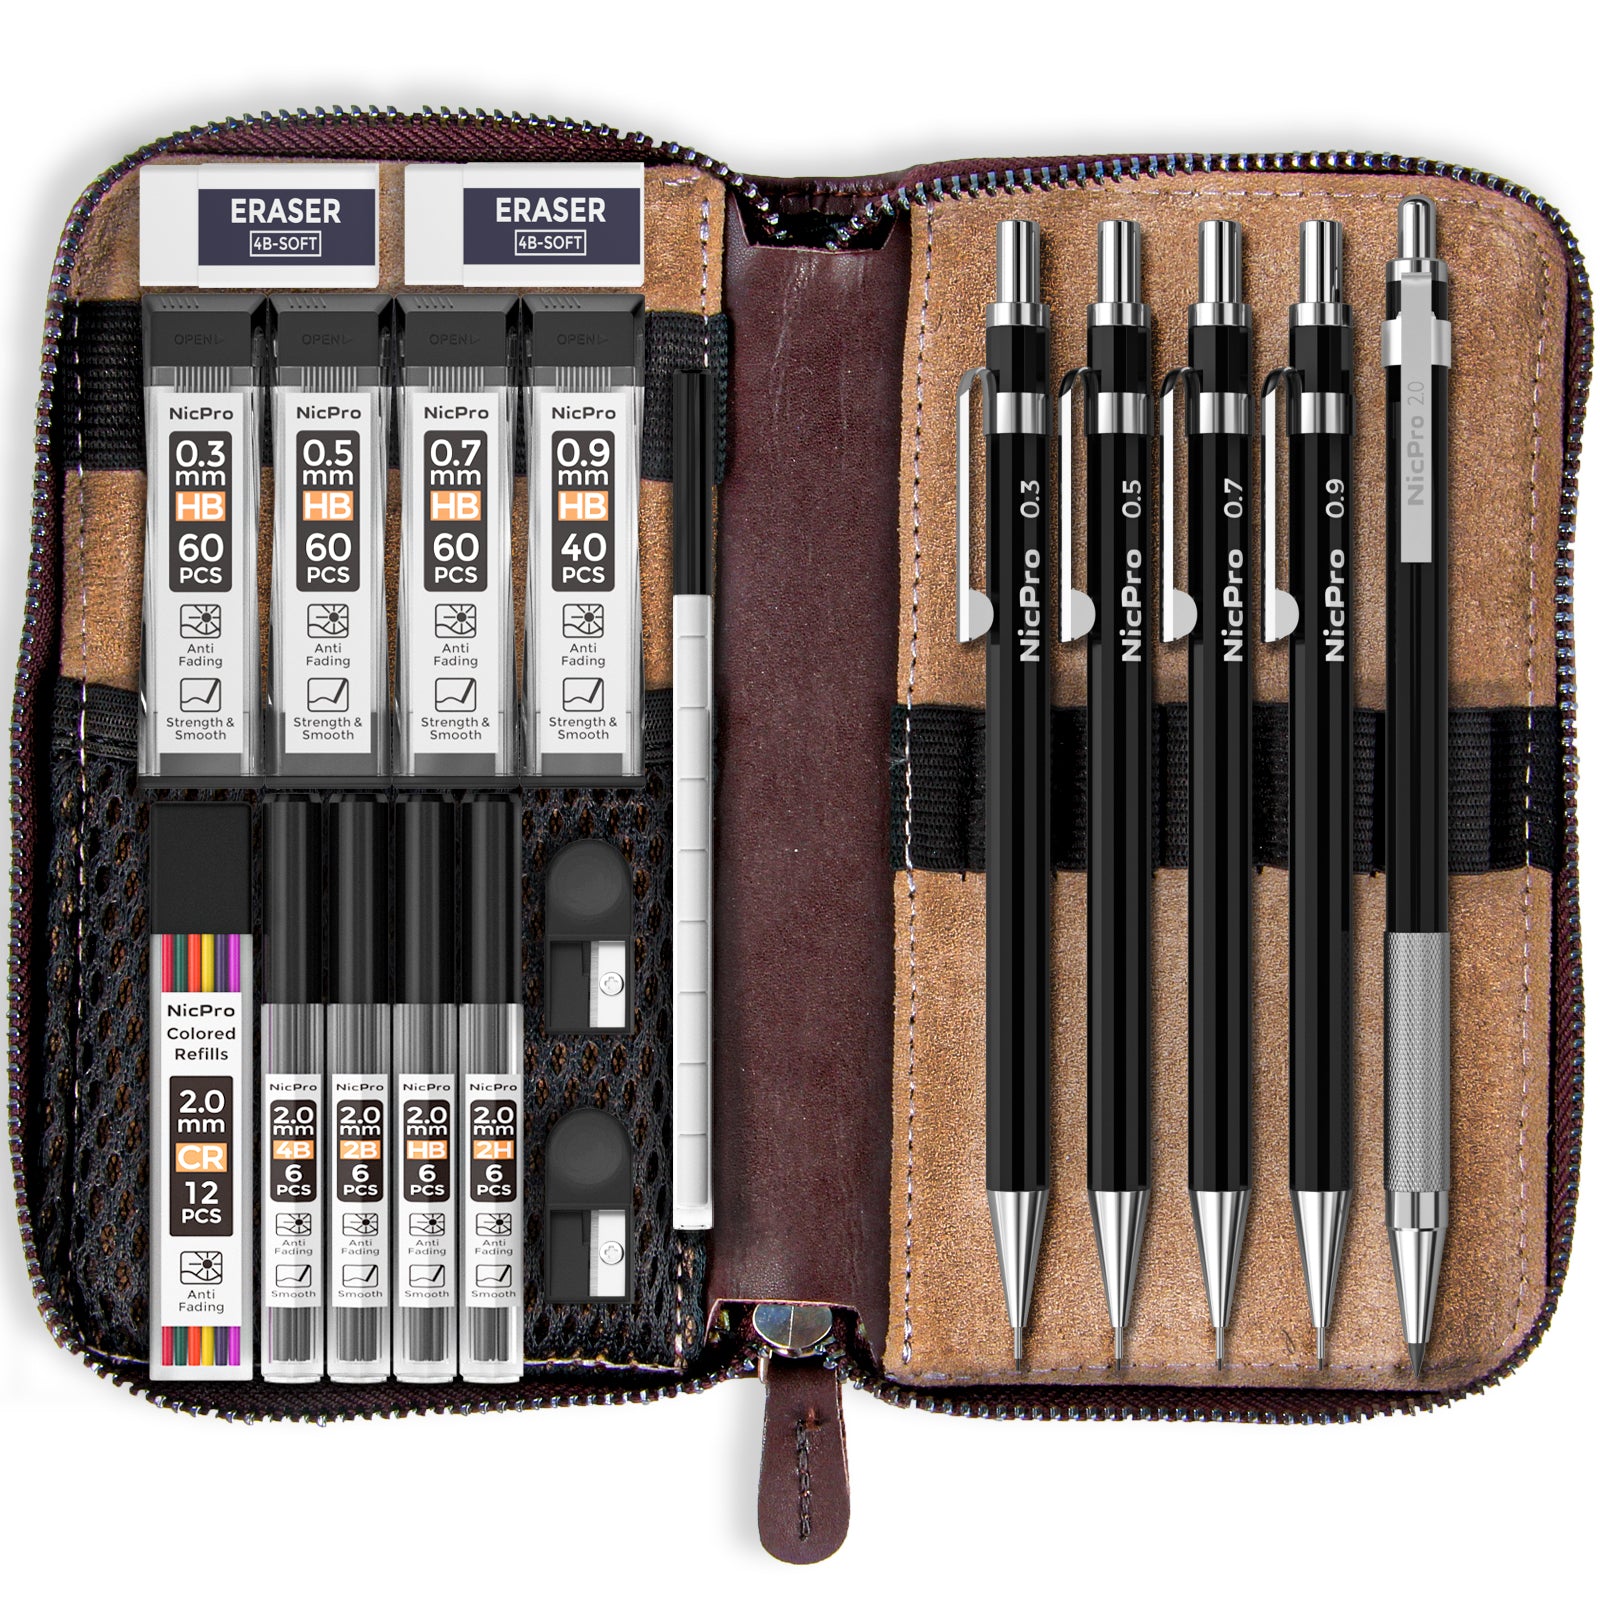 Nicpro 5 PCS Black Metal Mechanical Pencil Set in Leather Case, 0.3, 0.5, 0.7, 0.9 mm & 2mm Lead Pencil Holders, (4B 2B HB 2H) Lead Refills (Black & Colors), Erasers For Art Drafting Sketching Drawing